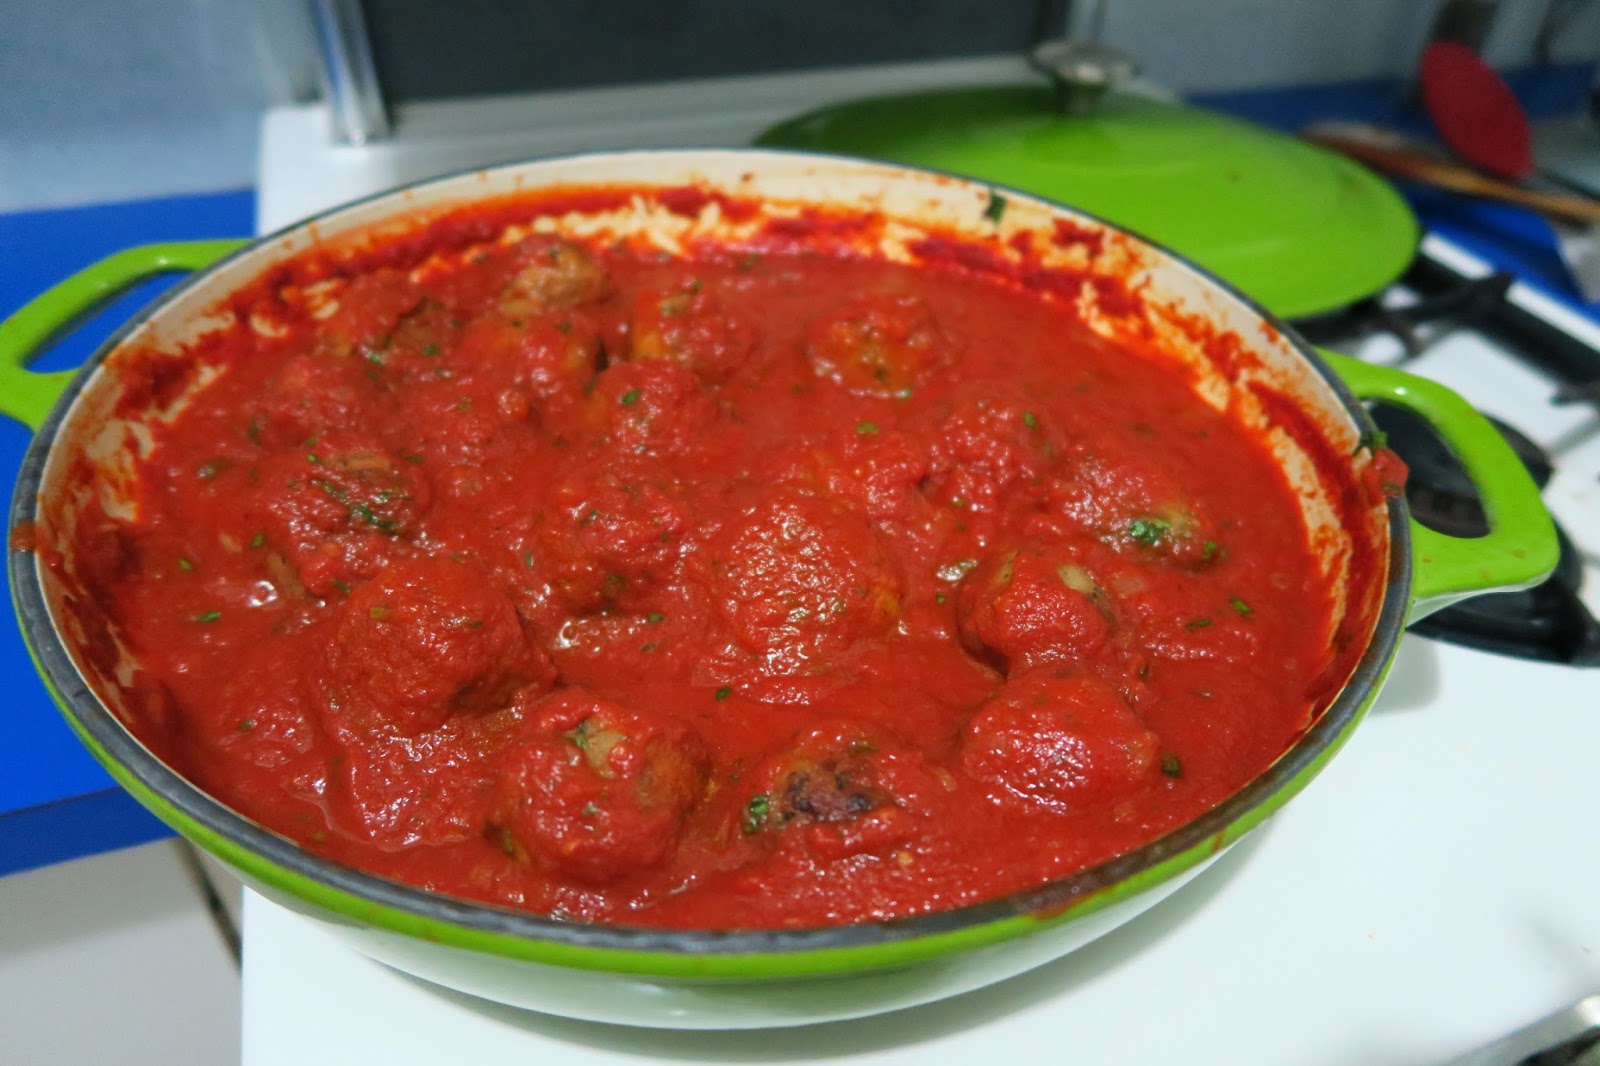 Eggplant and porcini meatless meatballs with tomato sauce.